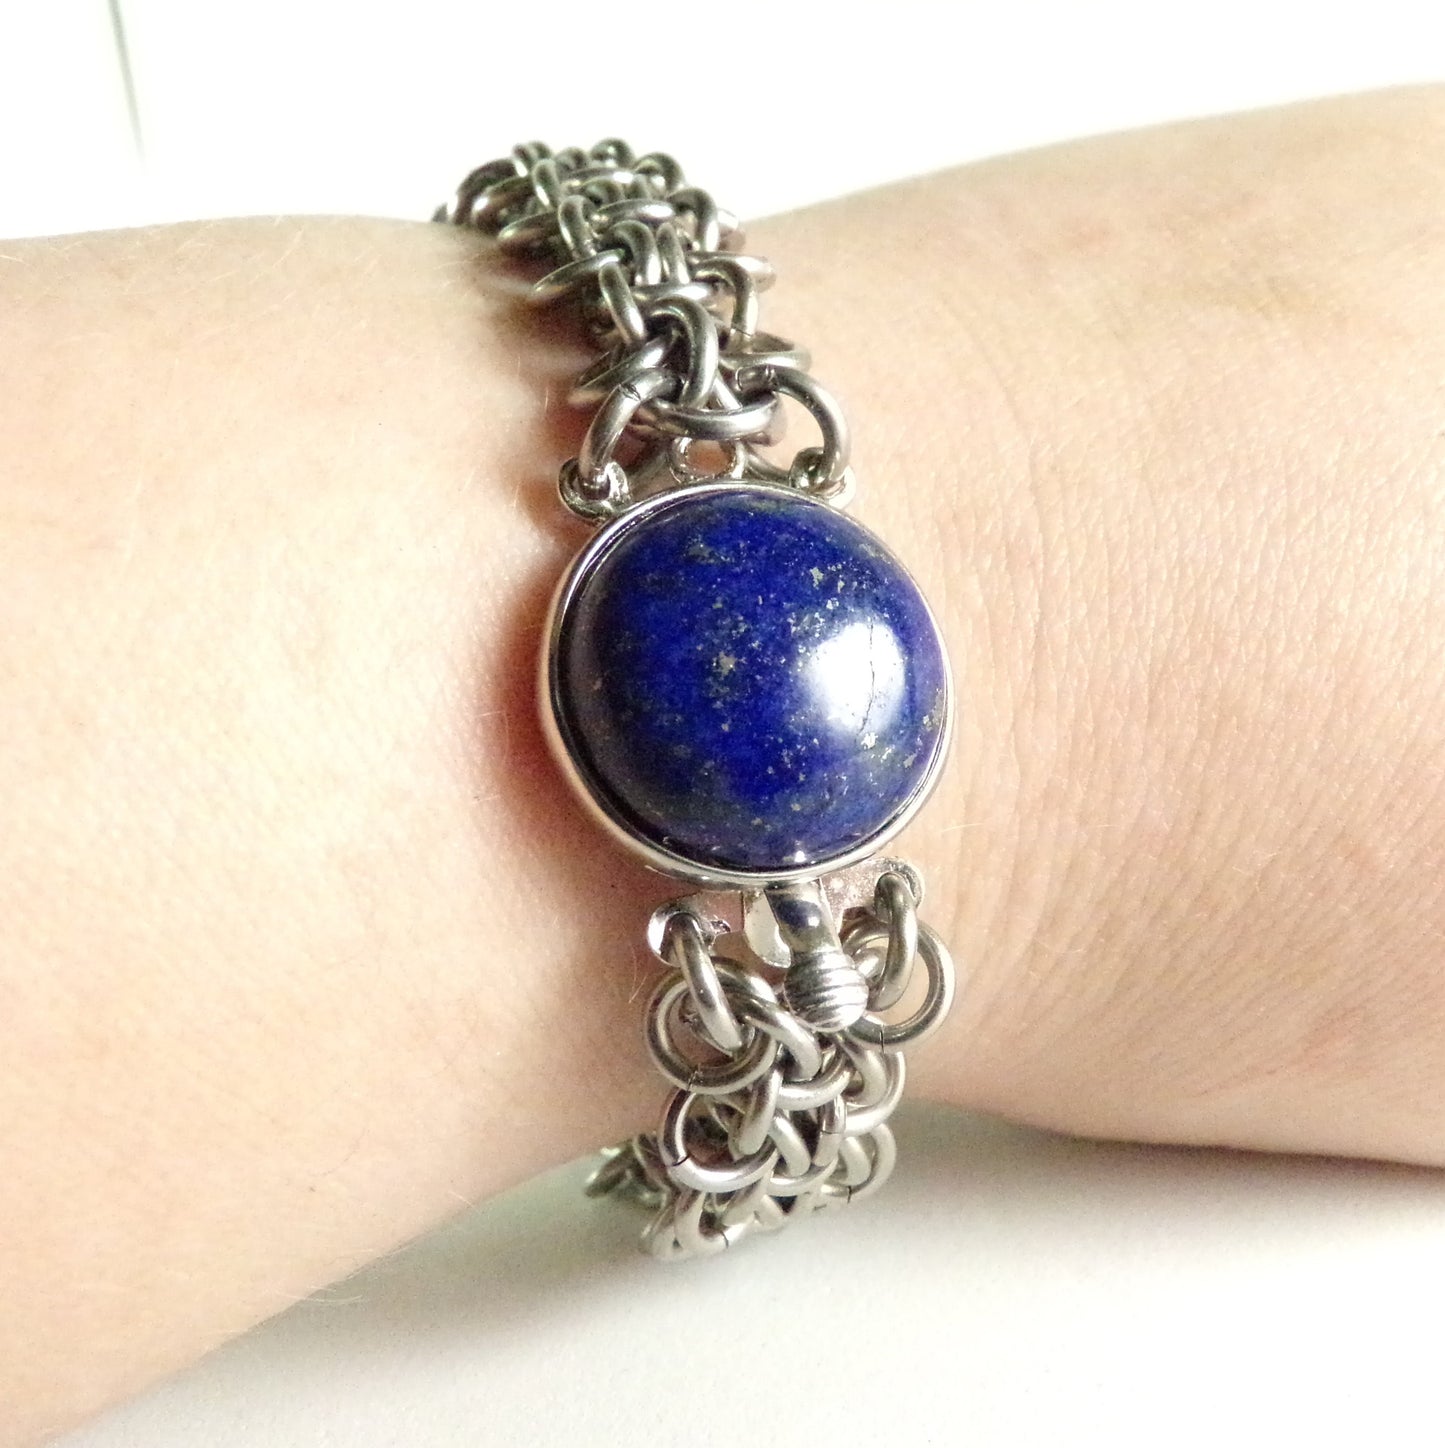 Lapis chainmaille - Stainless steel chainmaille bracelet - Chainmaille bracelet for her -11th anniversary gift - Lapis Lazulli Bracelet